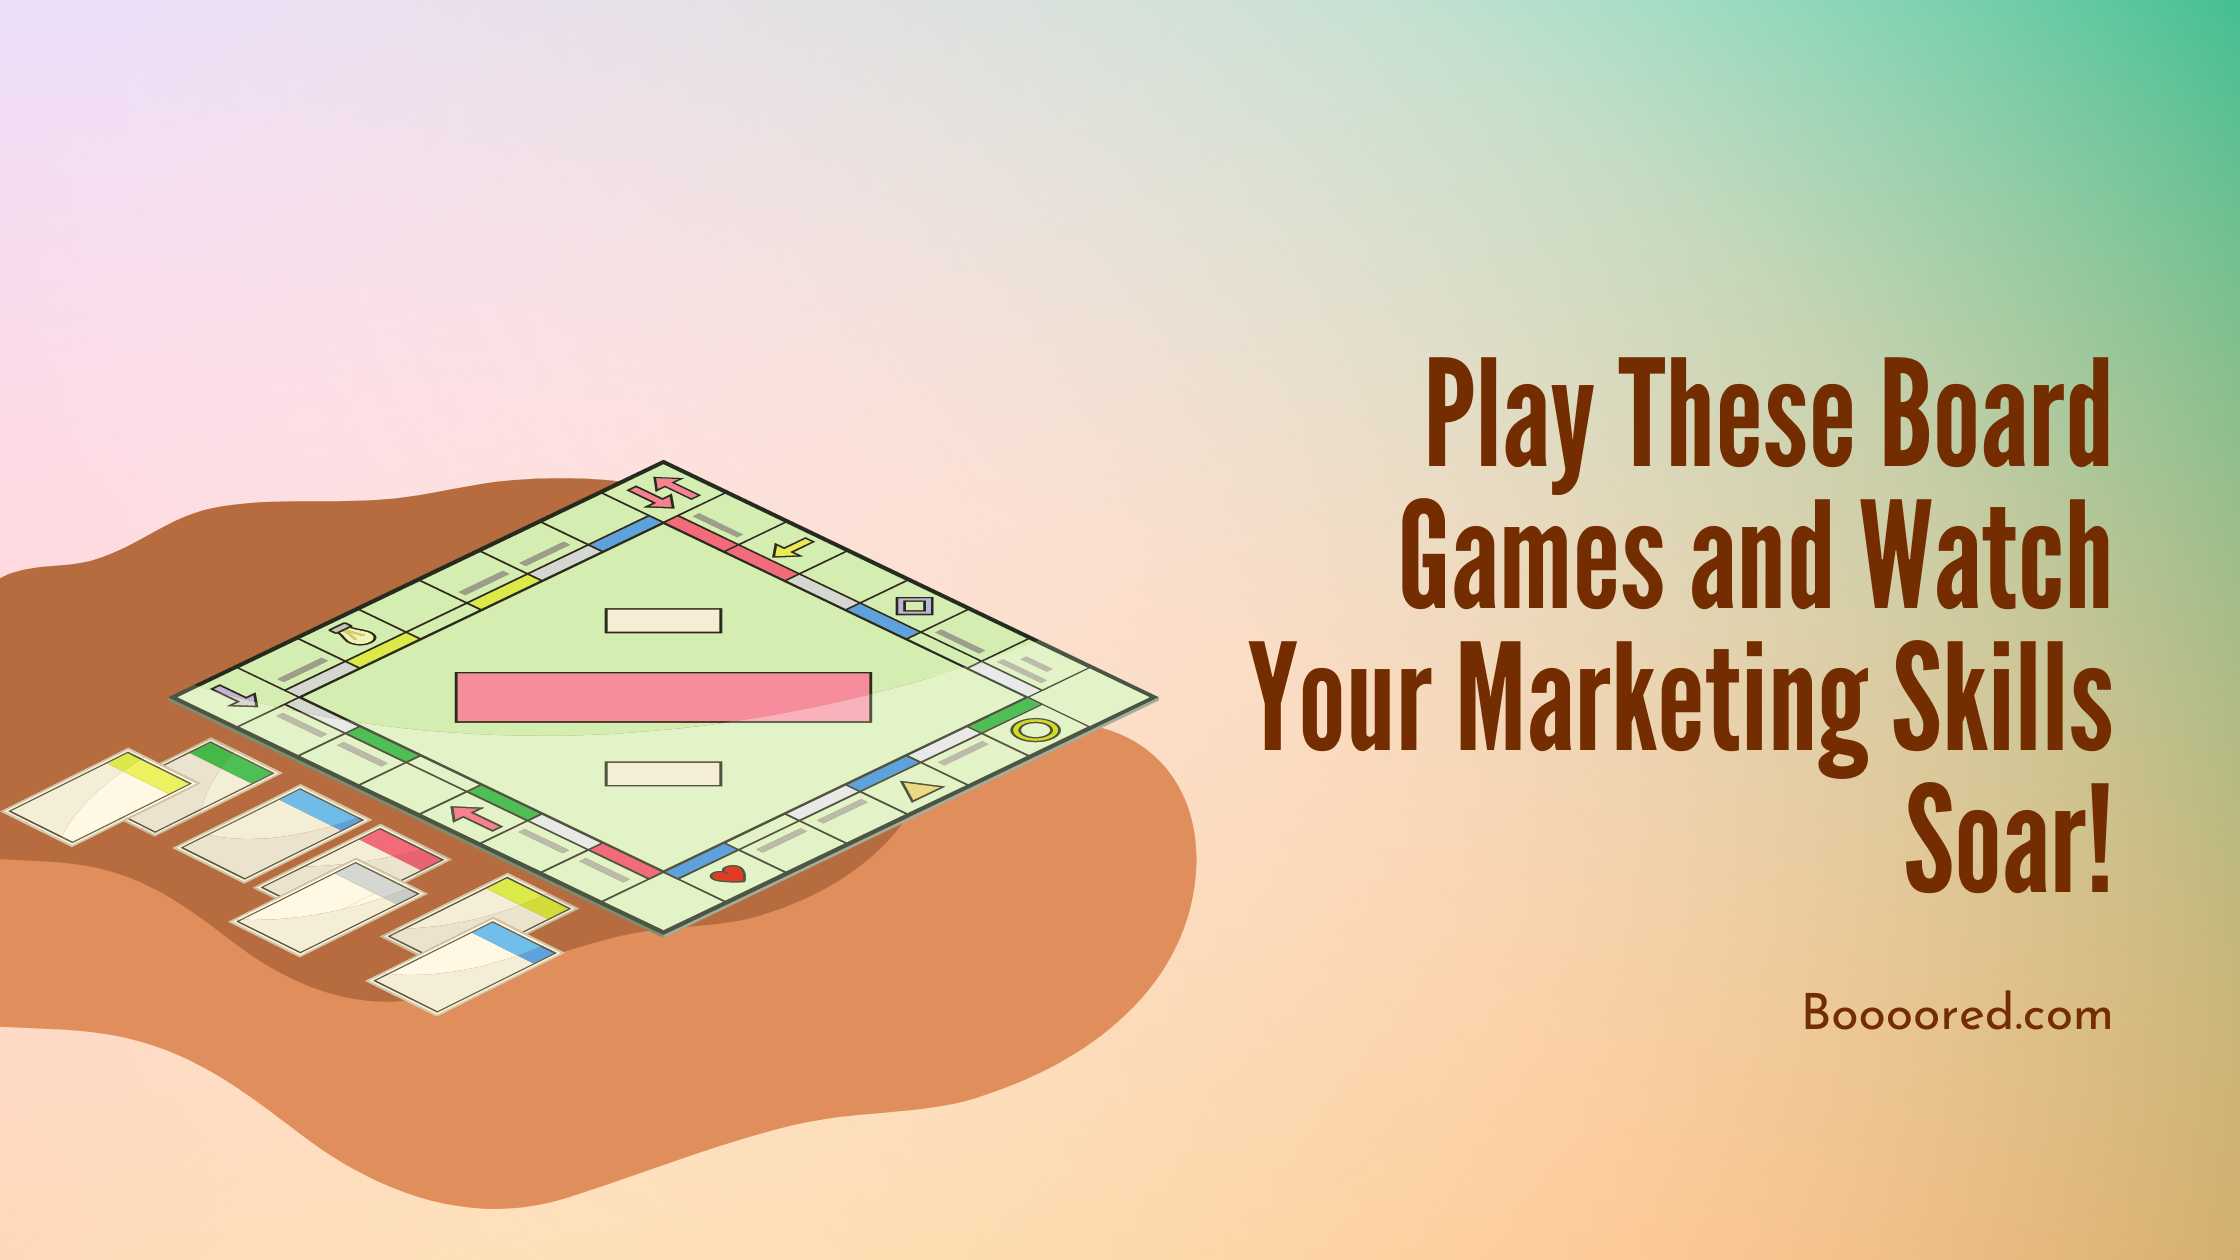 Play These Board Games and Watch Your Marketing Skills Soar!